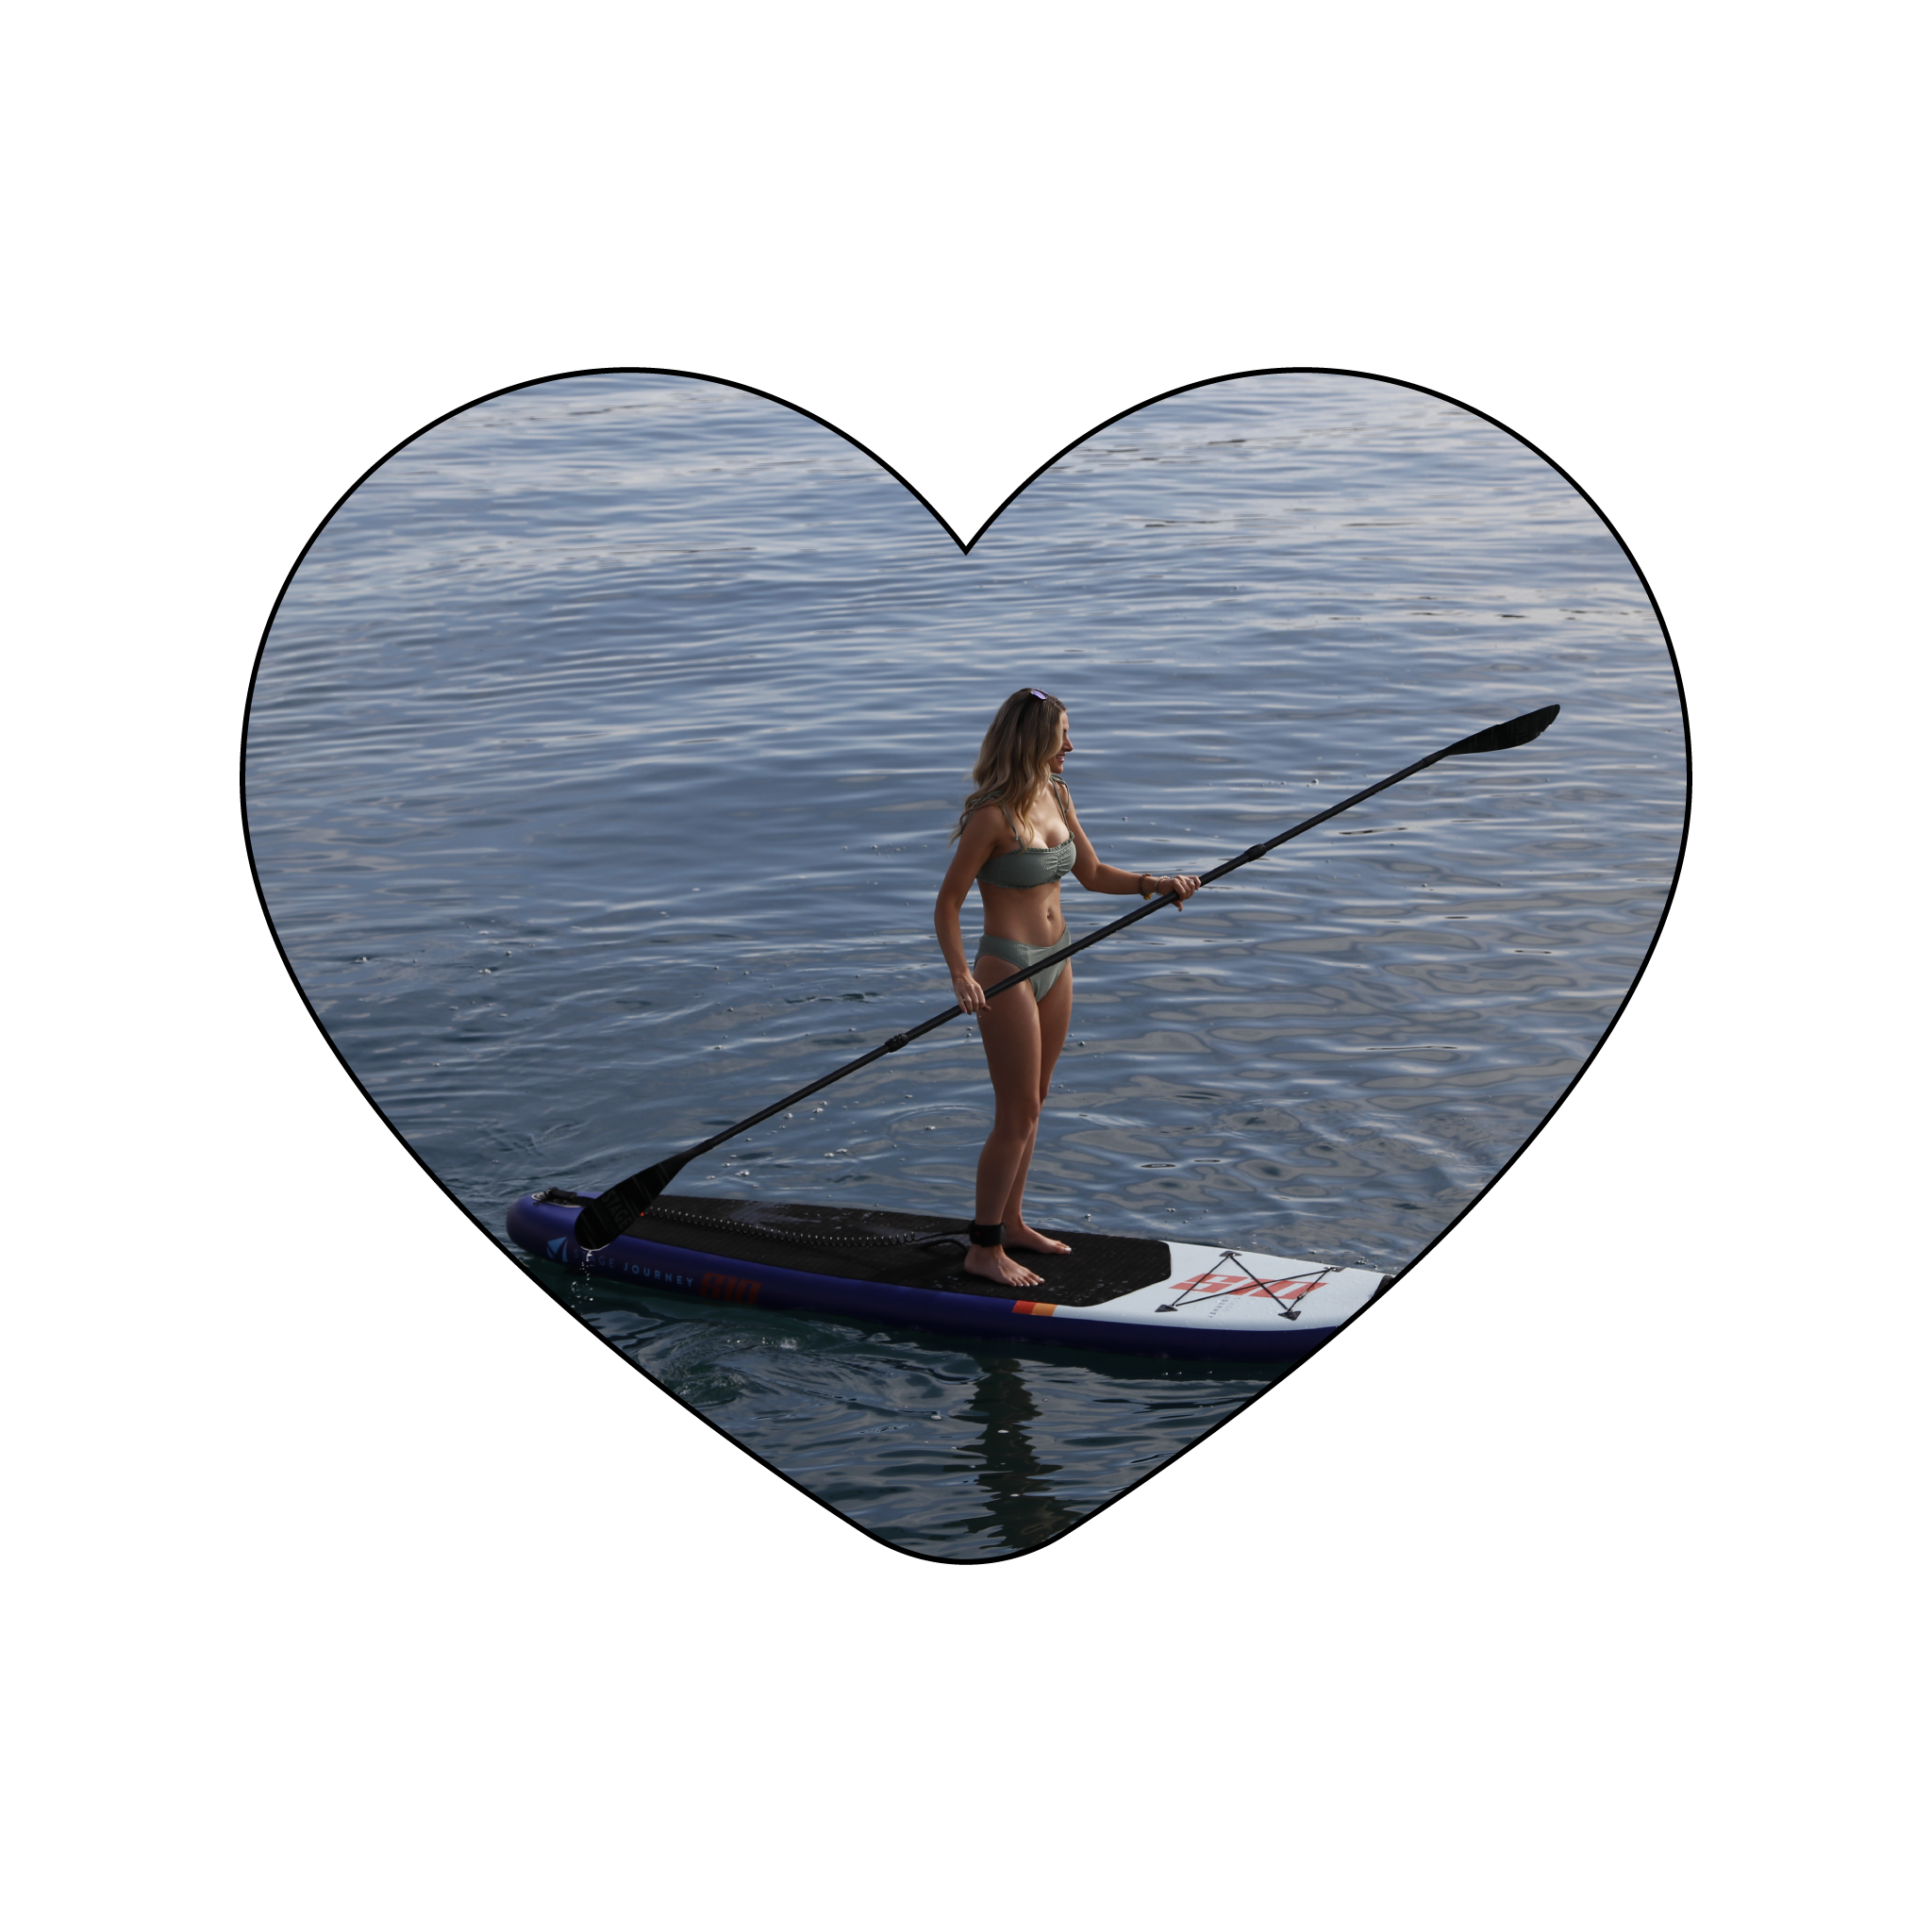 Heart shaped image showcasing the STAGE 2SIDE Paddle held by a girl on an inflatable Stand-up Paddleboard. The heart represents the STAGE 2SIDE Love Your 2SIDE Paddle Guarantee where STAGE offers free returns on the 2SIDE even if you use the paddle.